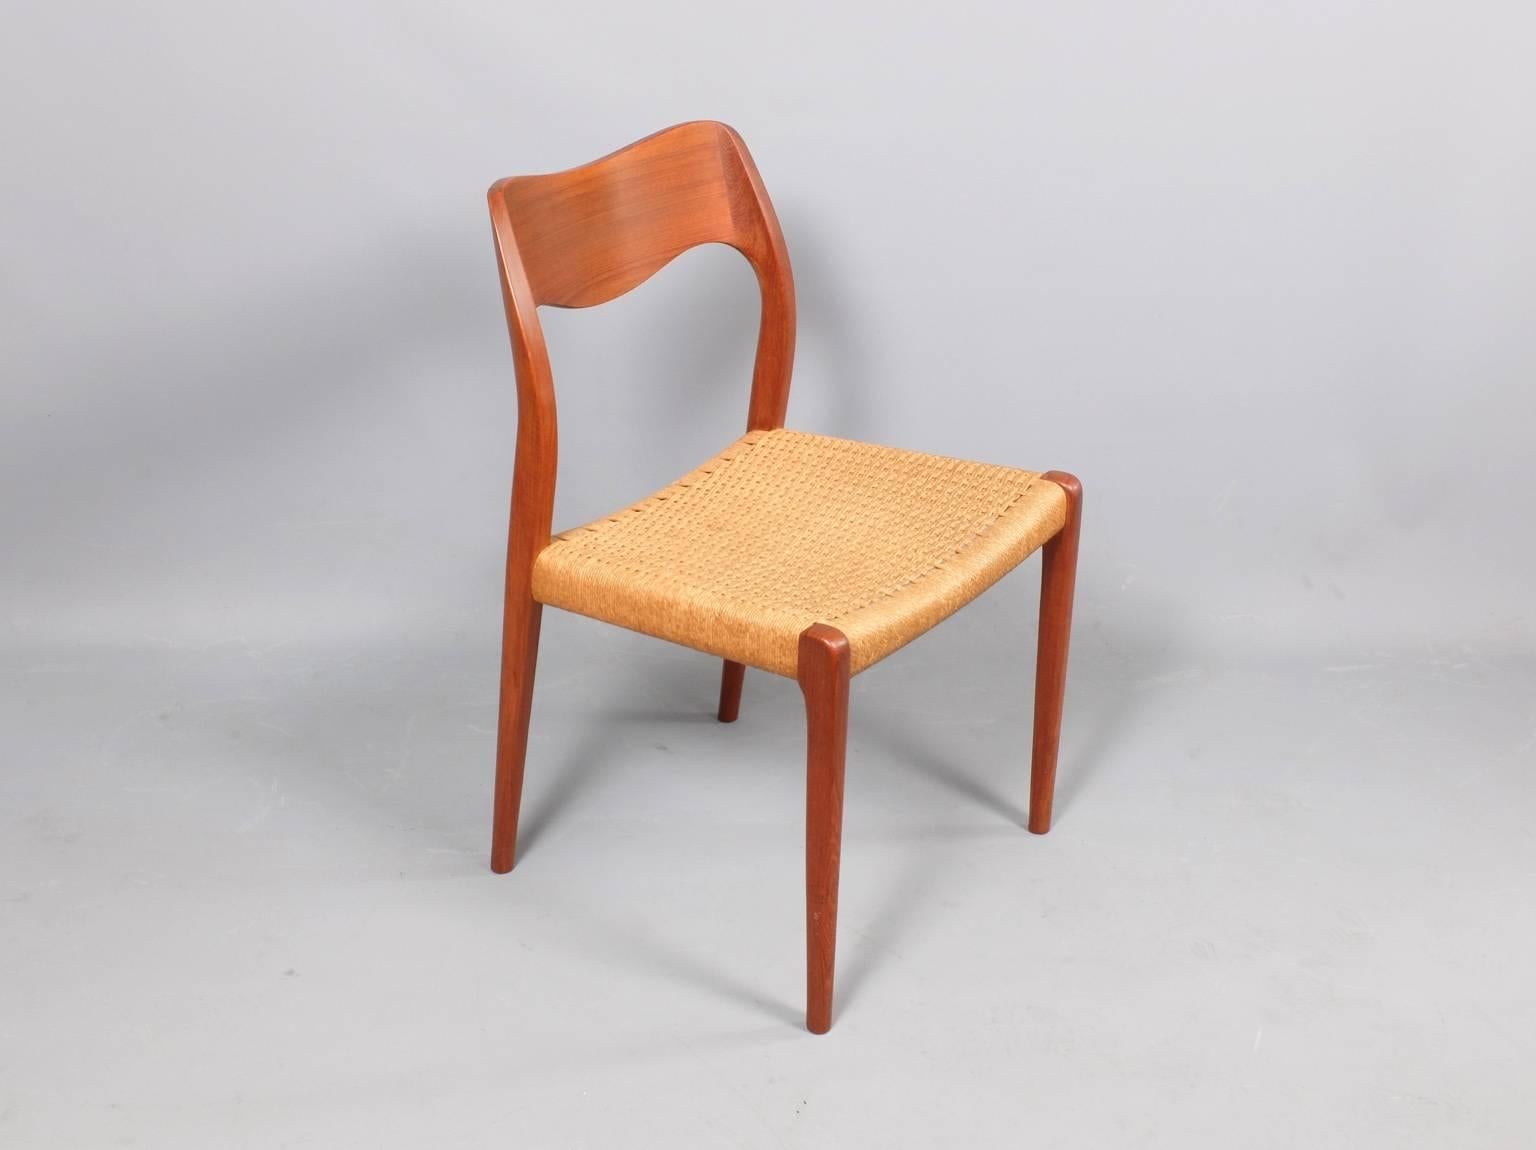 A set of six teak dining chairs designed by Niels Otto Moller and manufactured by J L Moller, Denmark, circa 1960. The chairs retain their original twisted paper cord seats.